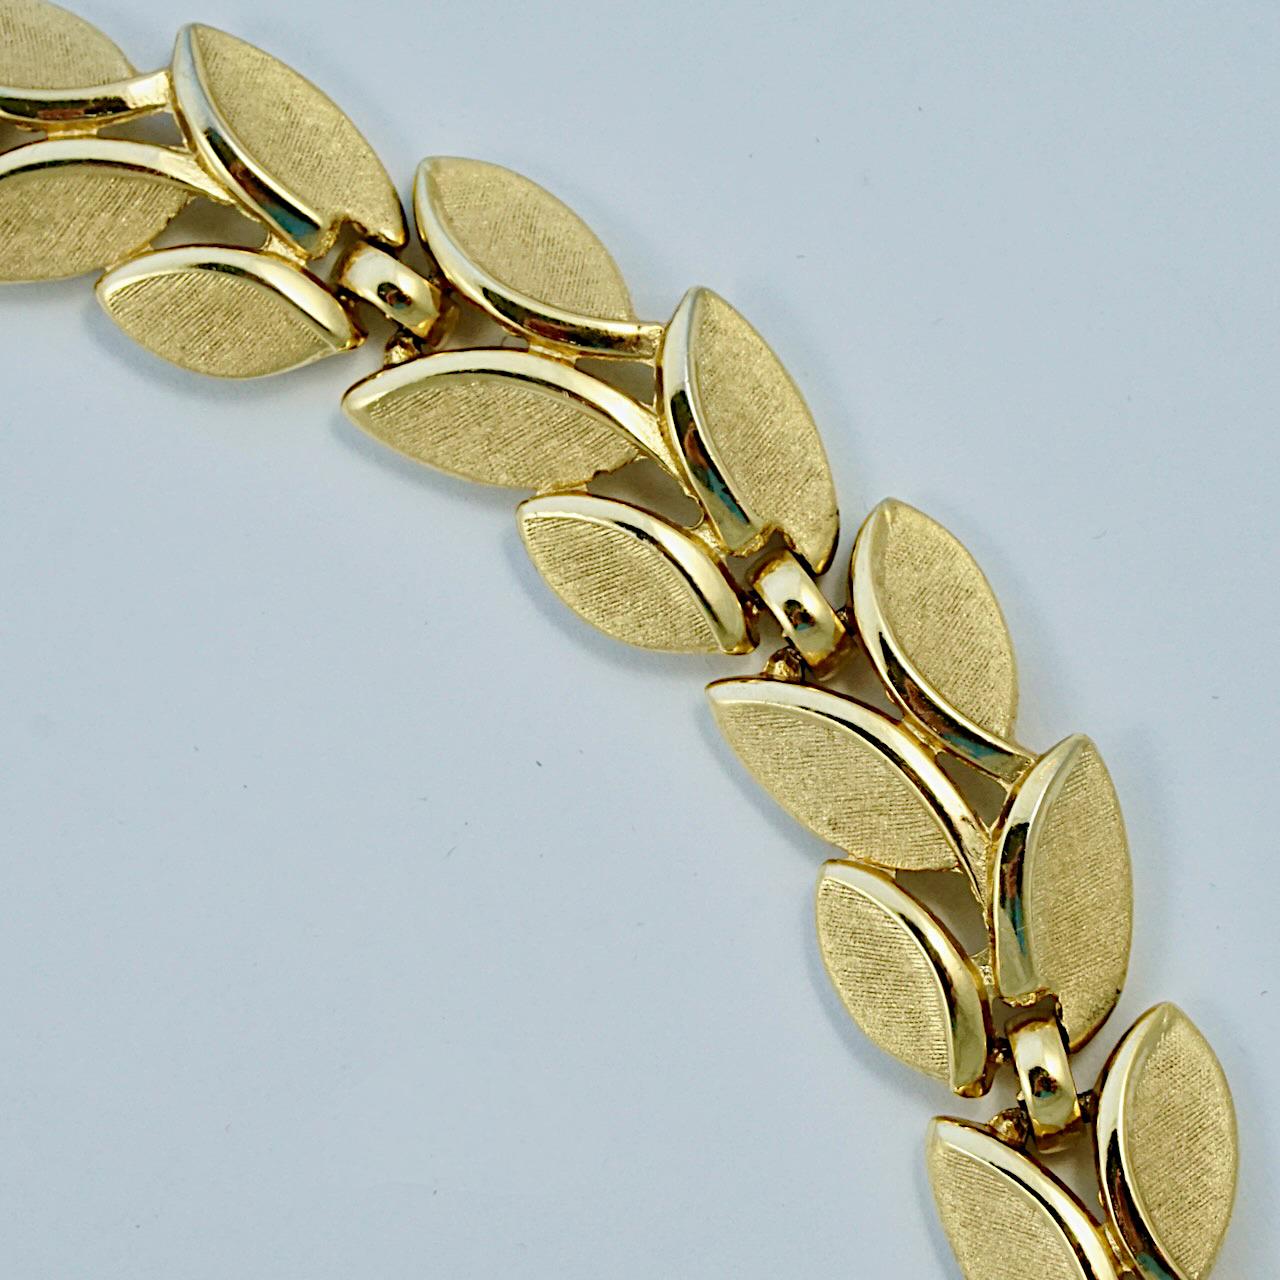 Beautiful Trifari gold plated brushed and shiny leaves link necklace. Measuring length 39.5 cm / 15.5 inches including the extension chain with the Trifari logo charm, by width 1.3 cm / .5 inch. 

This classic Trifari necklace is circa 1960s. It's